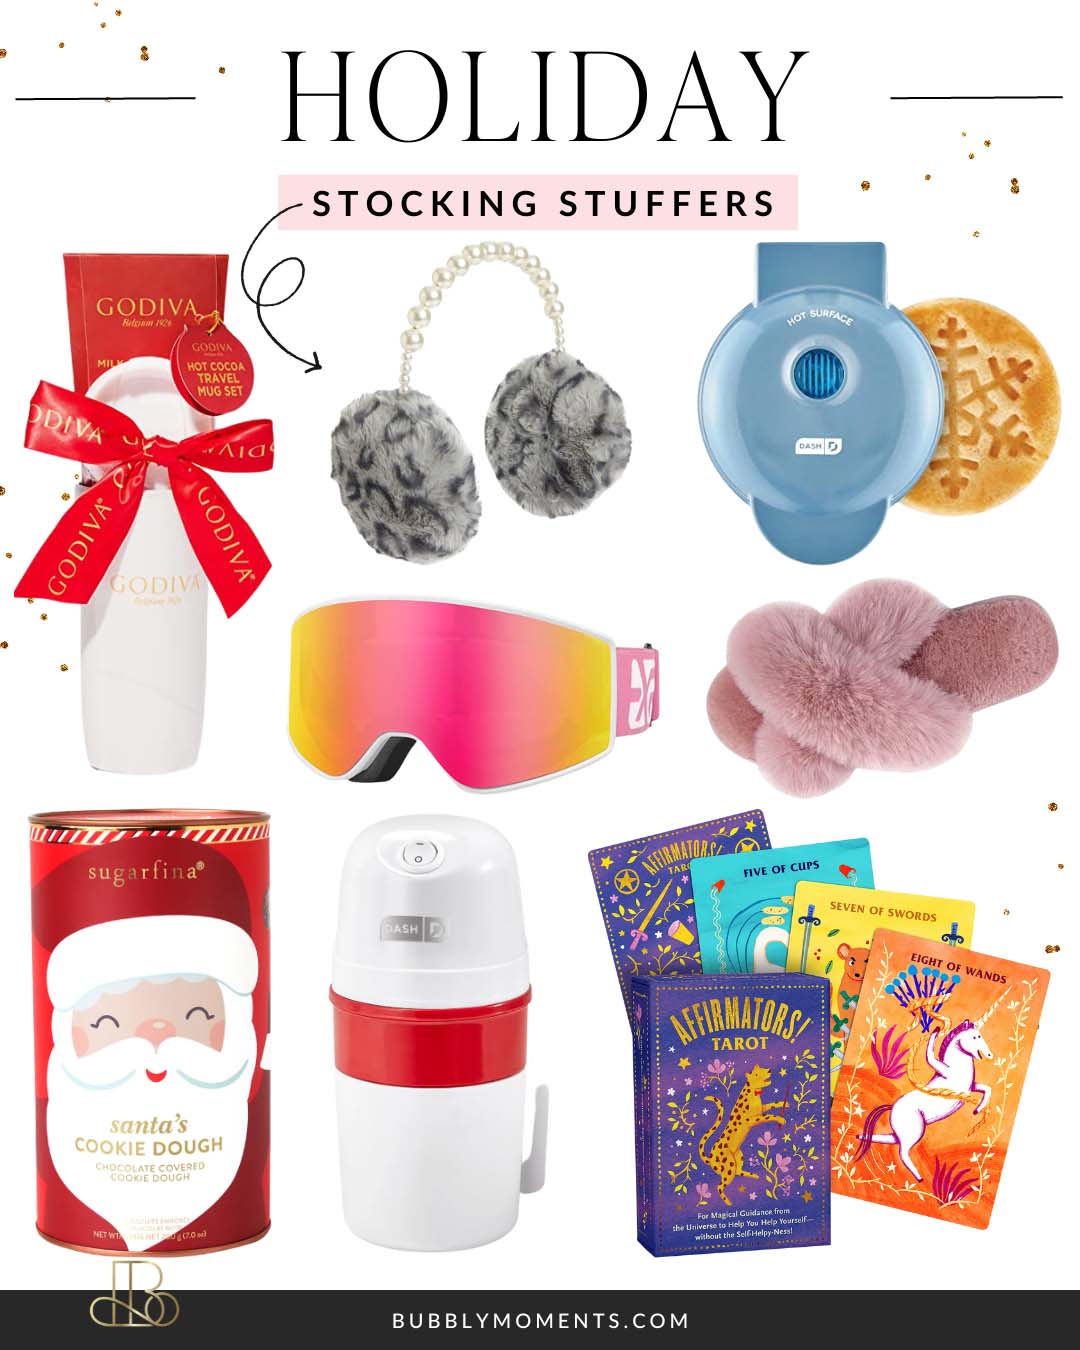 25 Holiday Gifts and Stocking Stuffers to Shop Right Now, Starting at $15